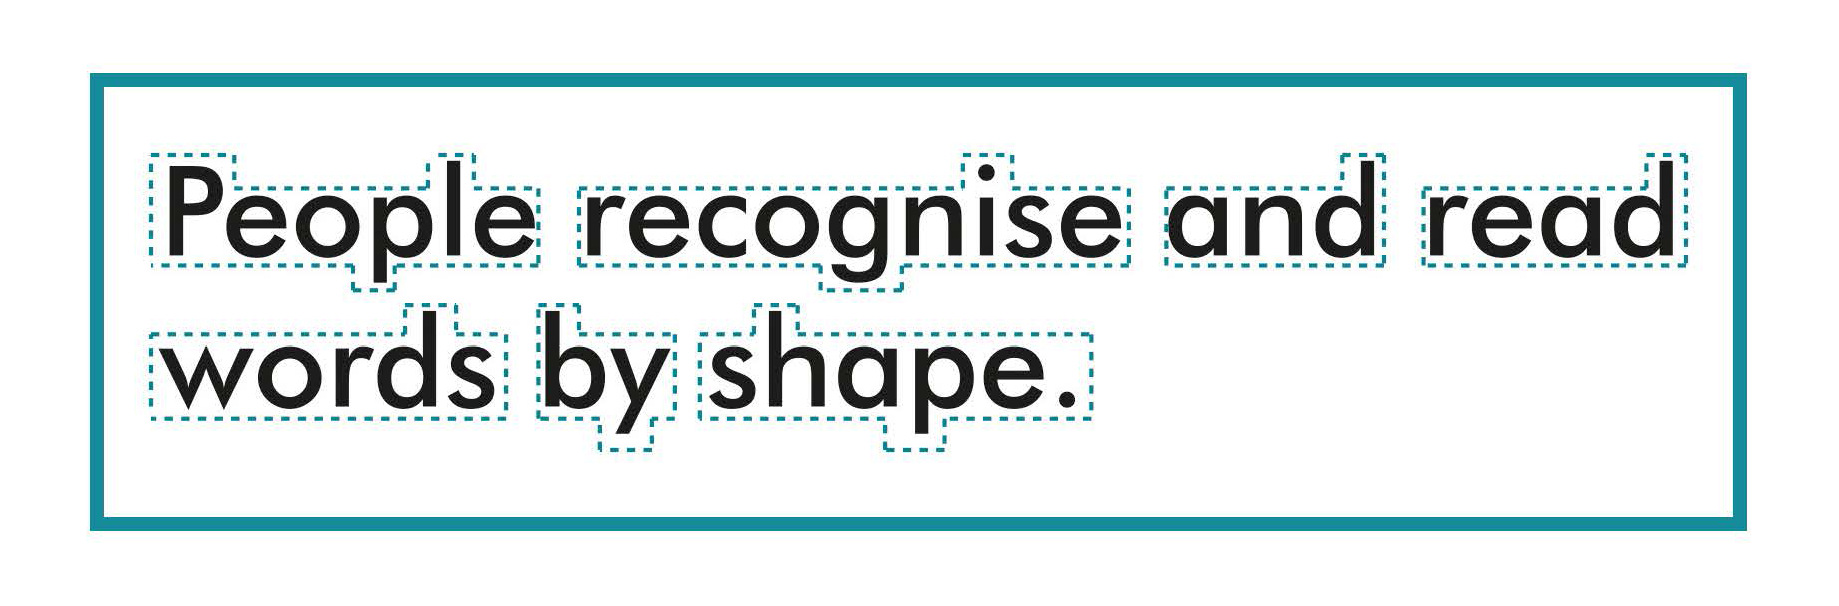 Image showing text with an outline around it to demonstrate how people recognise and read words by shape.